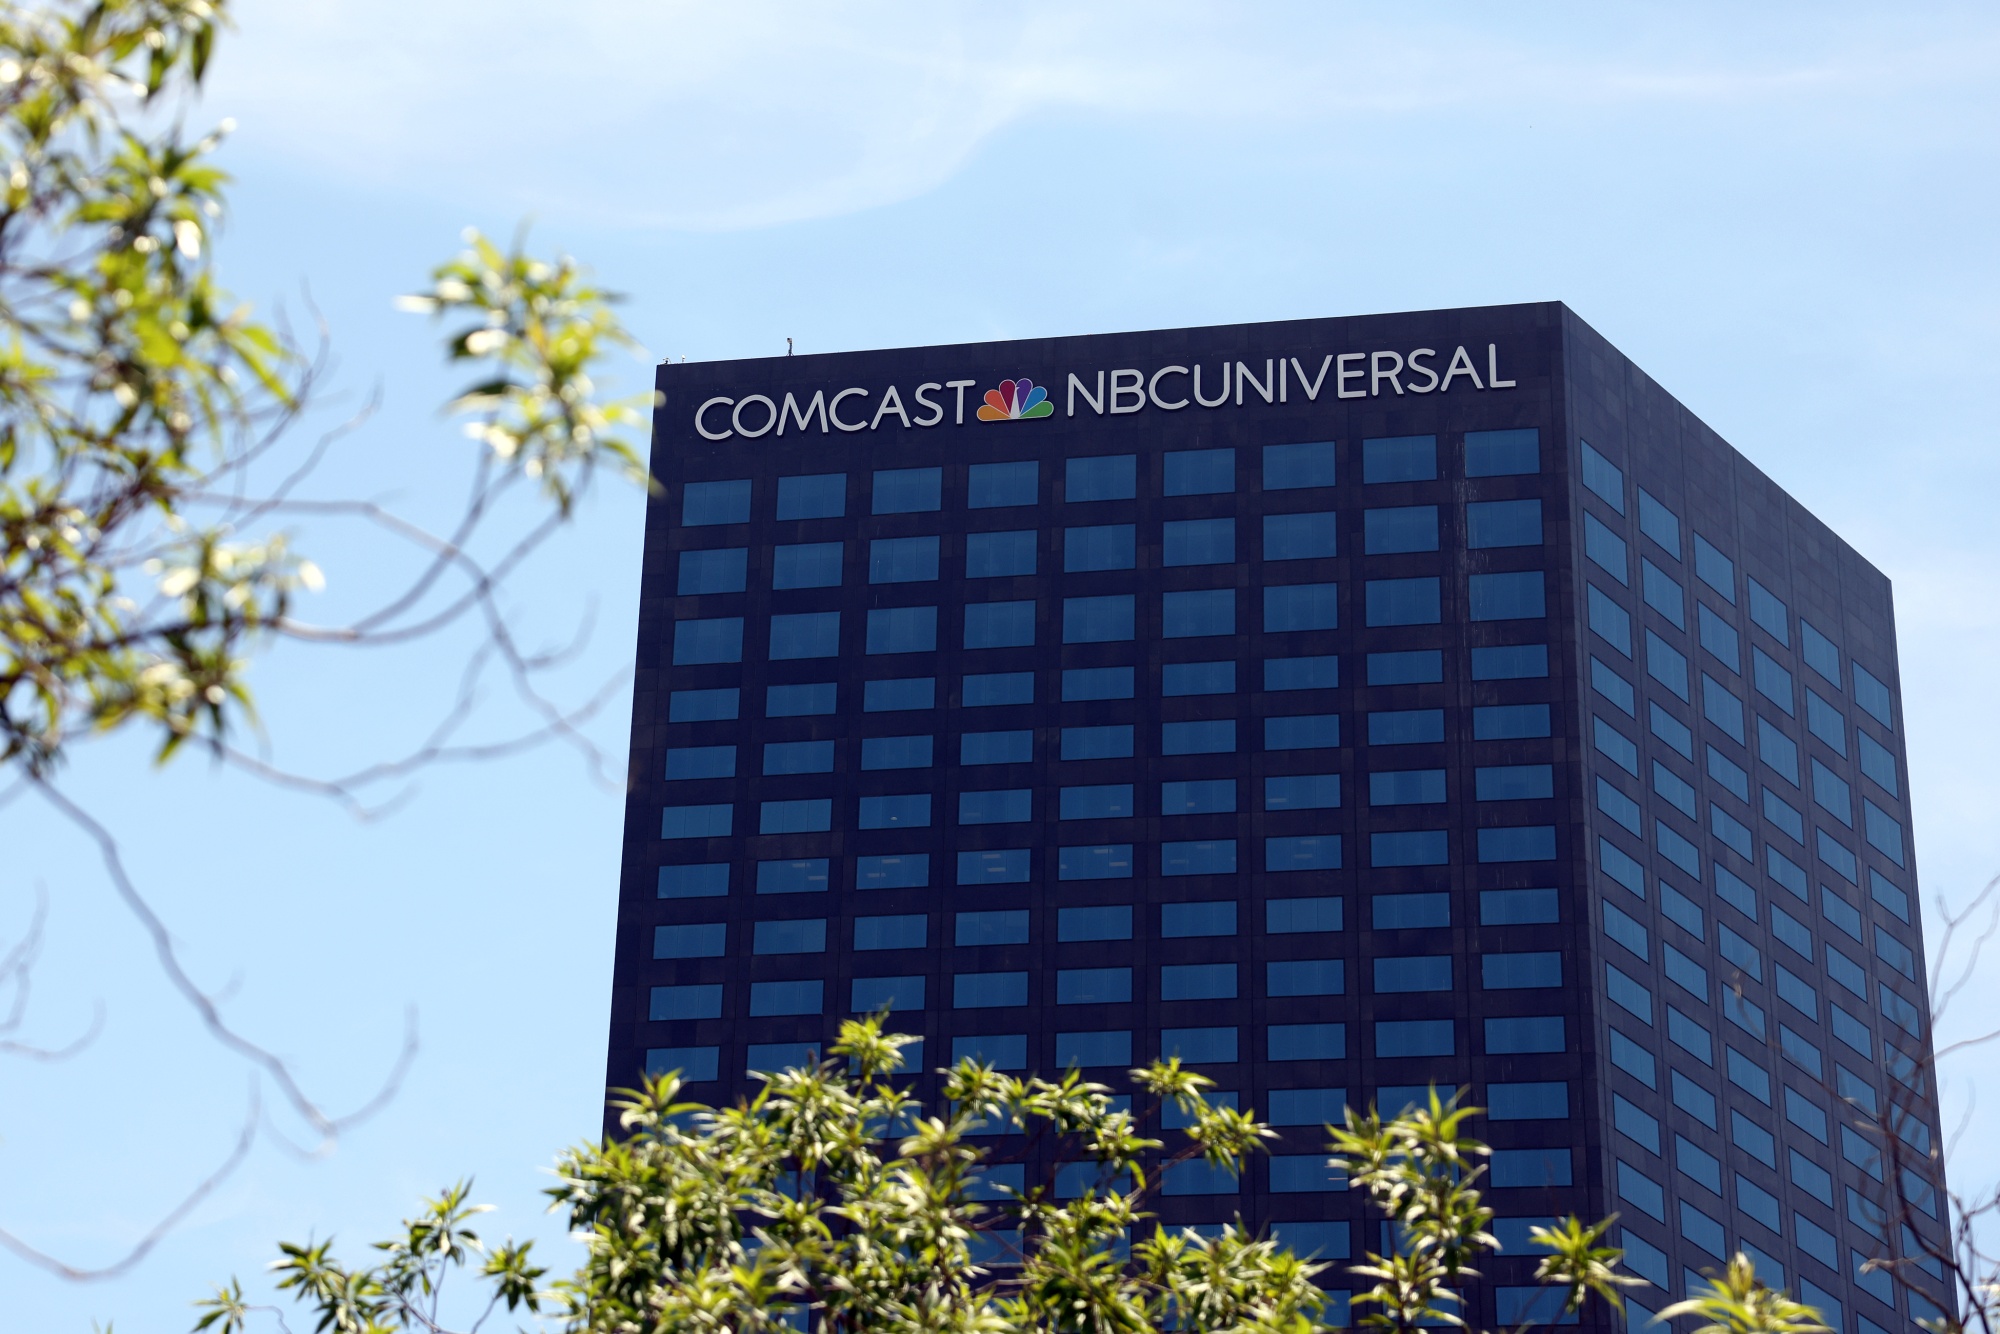 The Comcast and NBC Universal building in Universal City.